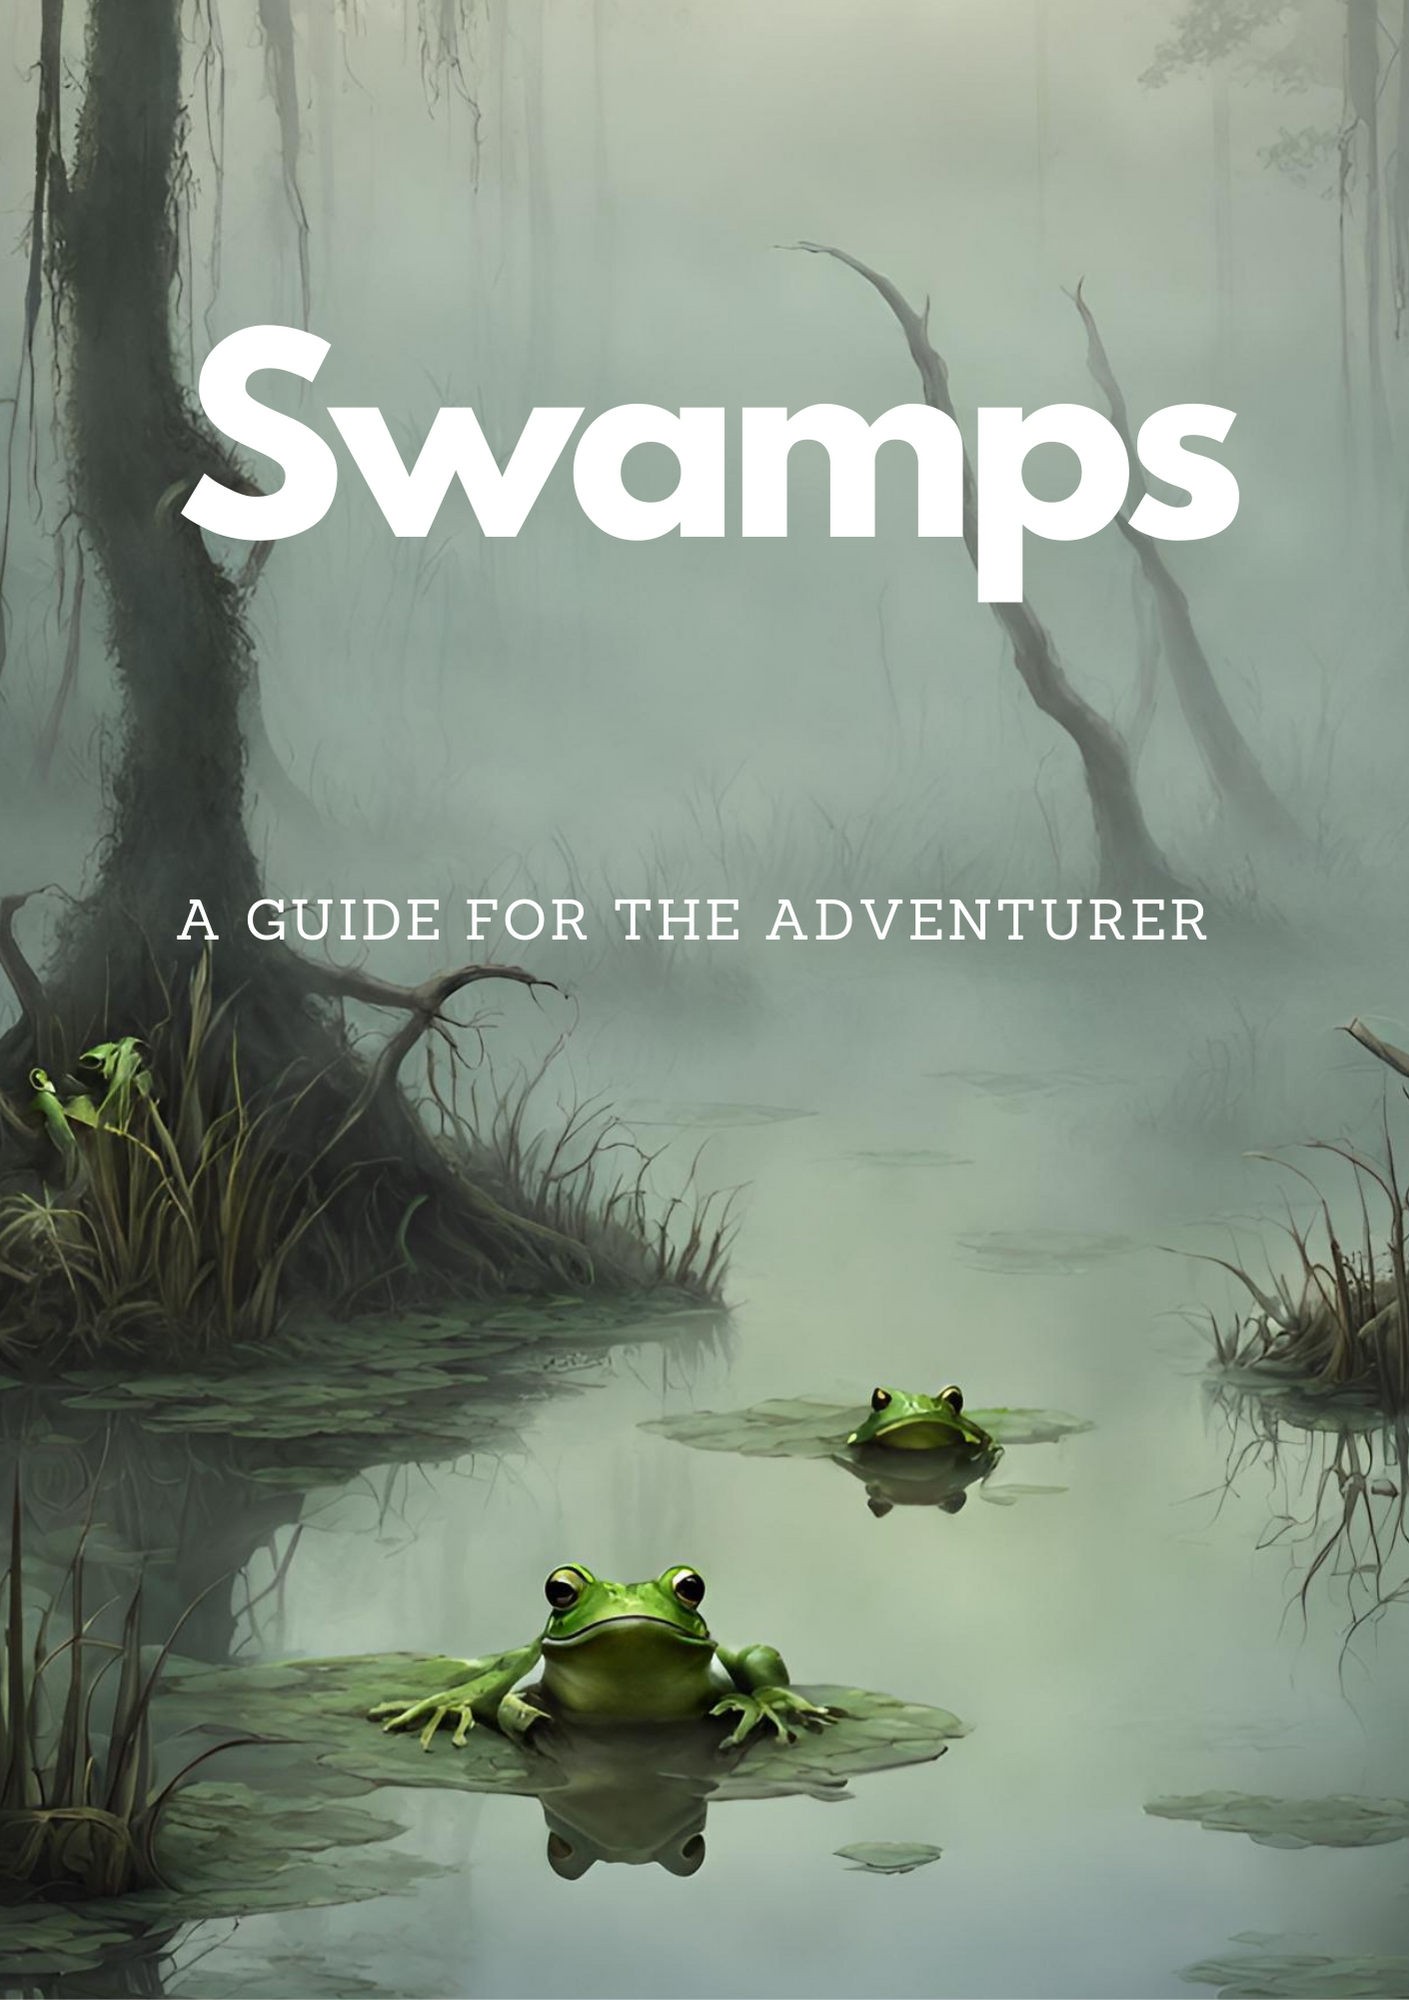 SWAMPS